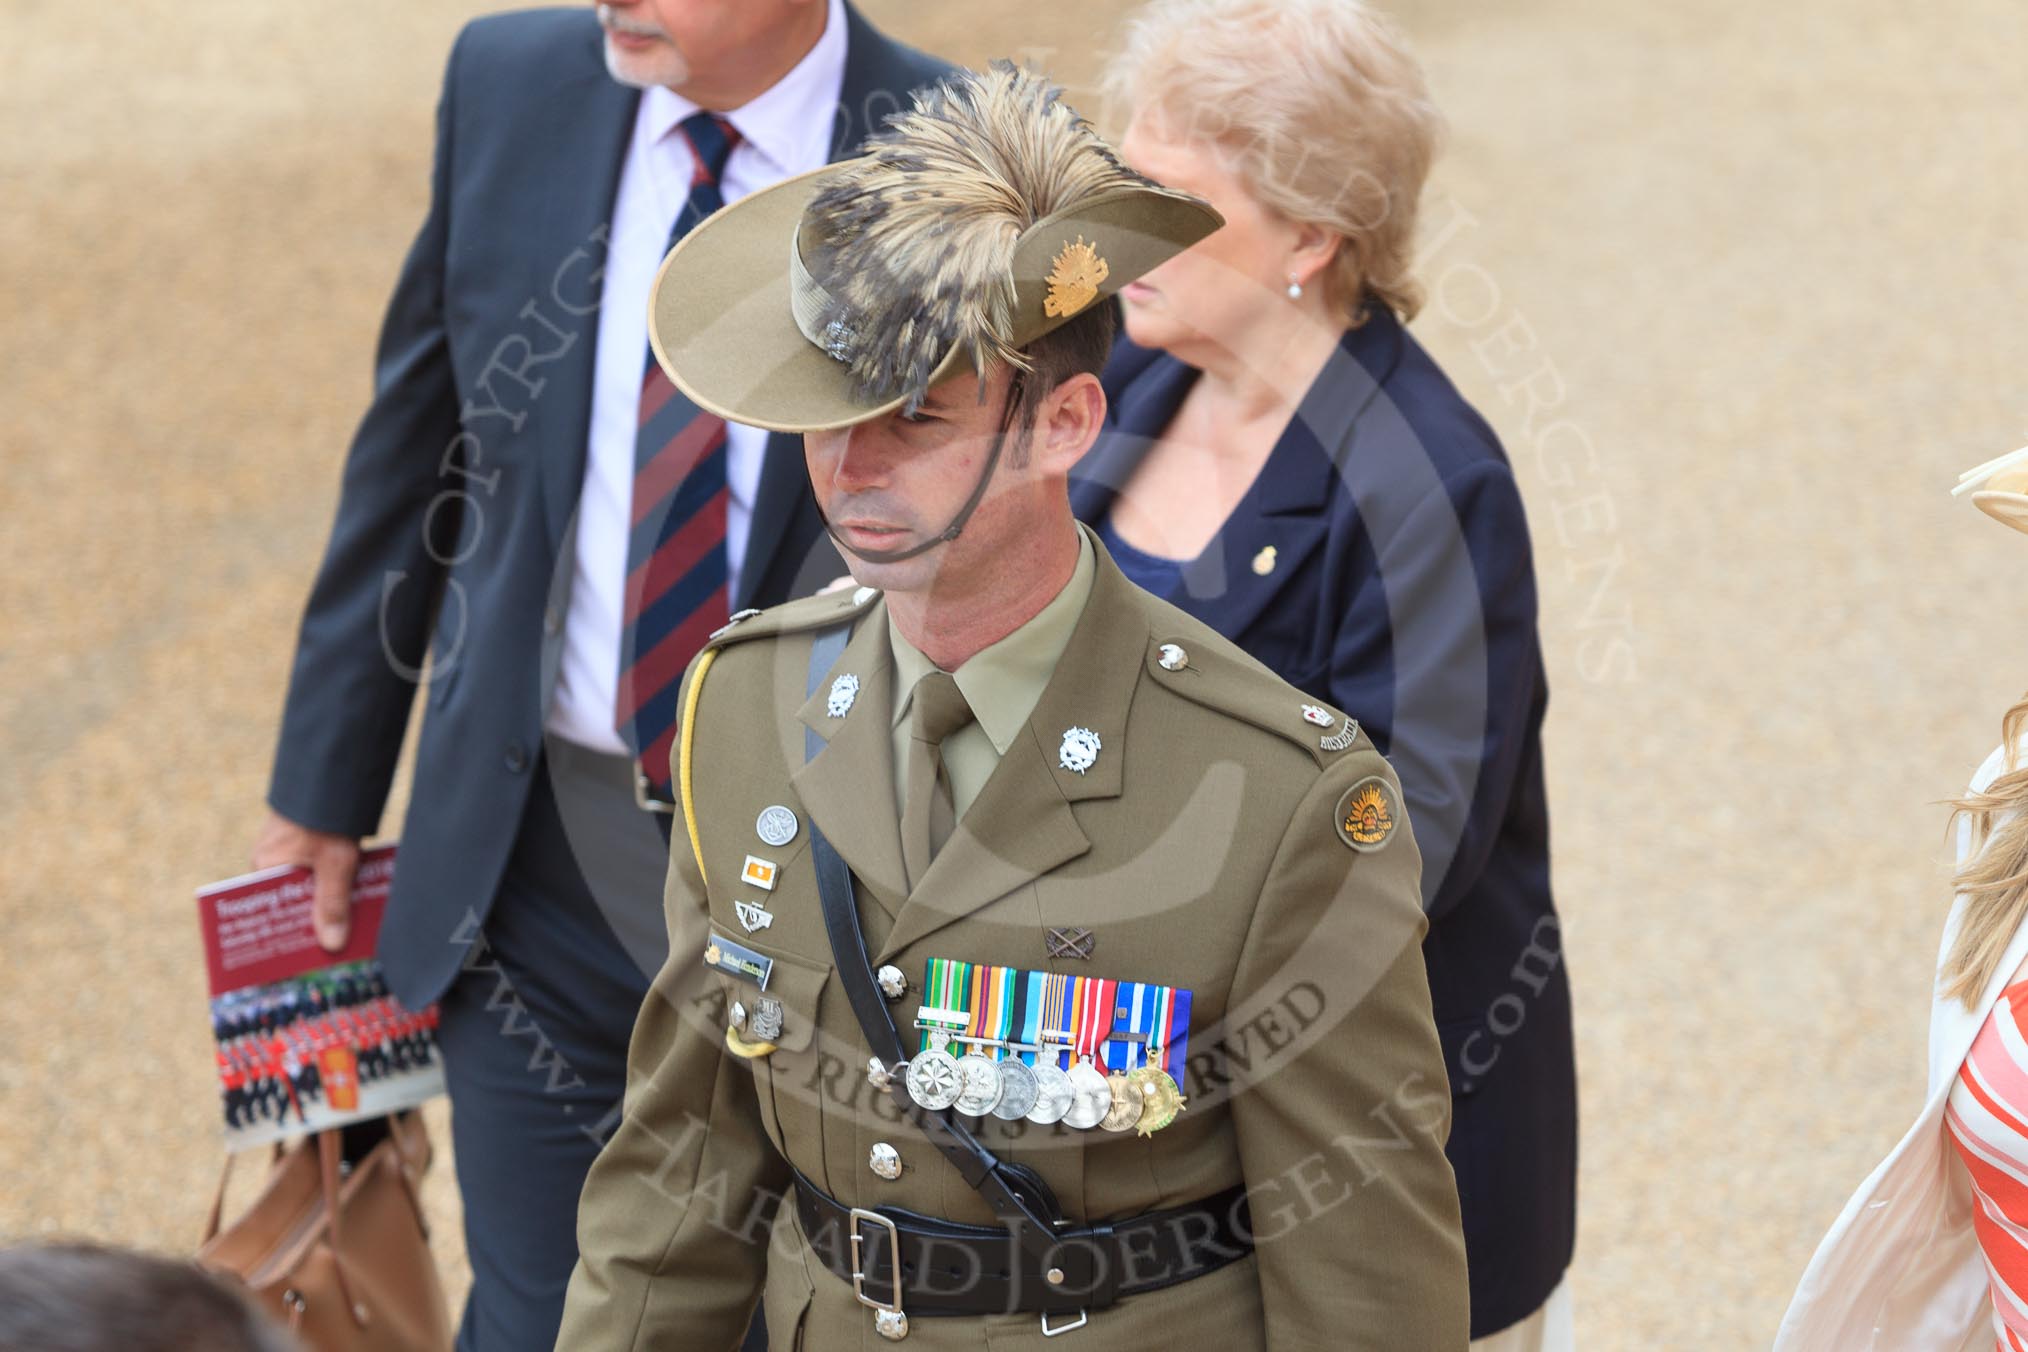 Australian Army Major Michael Henderson during Trooping the Colour 2018, The Queen's Birthday Parade at Horse Guards Parade, Westminster, London, 9 June 2018, 09:04.